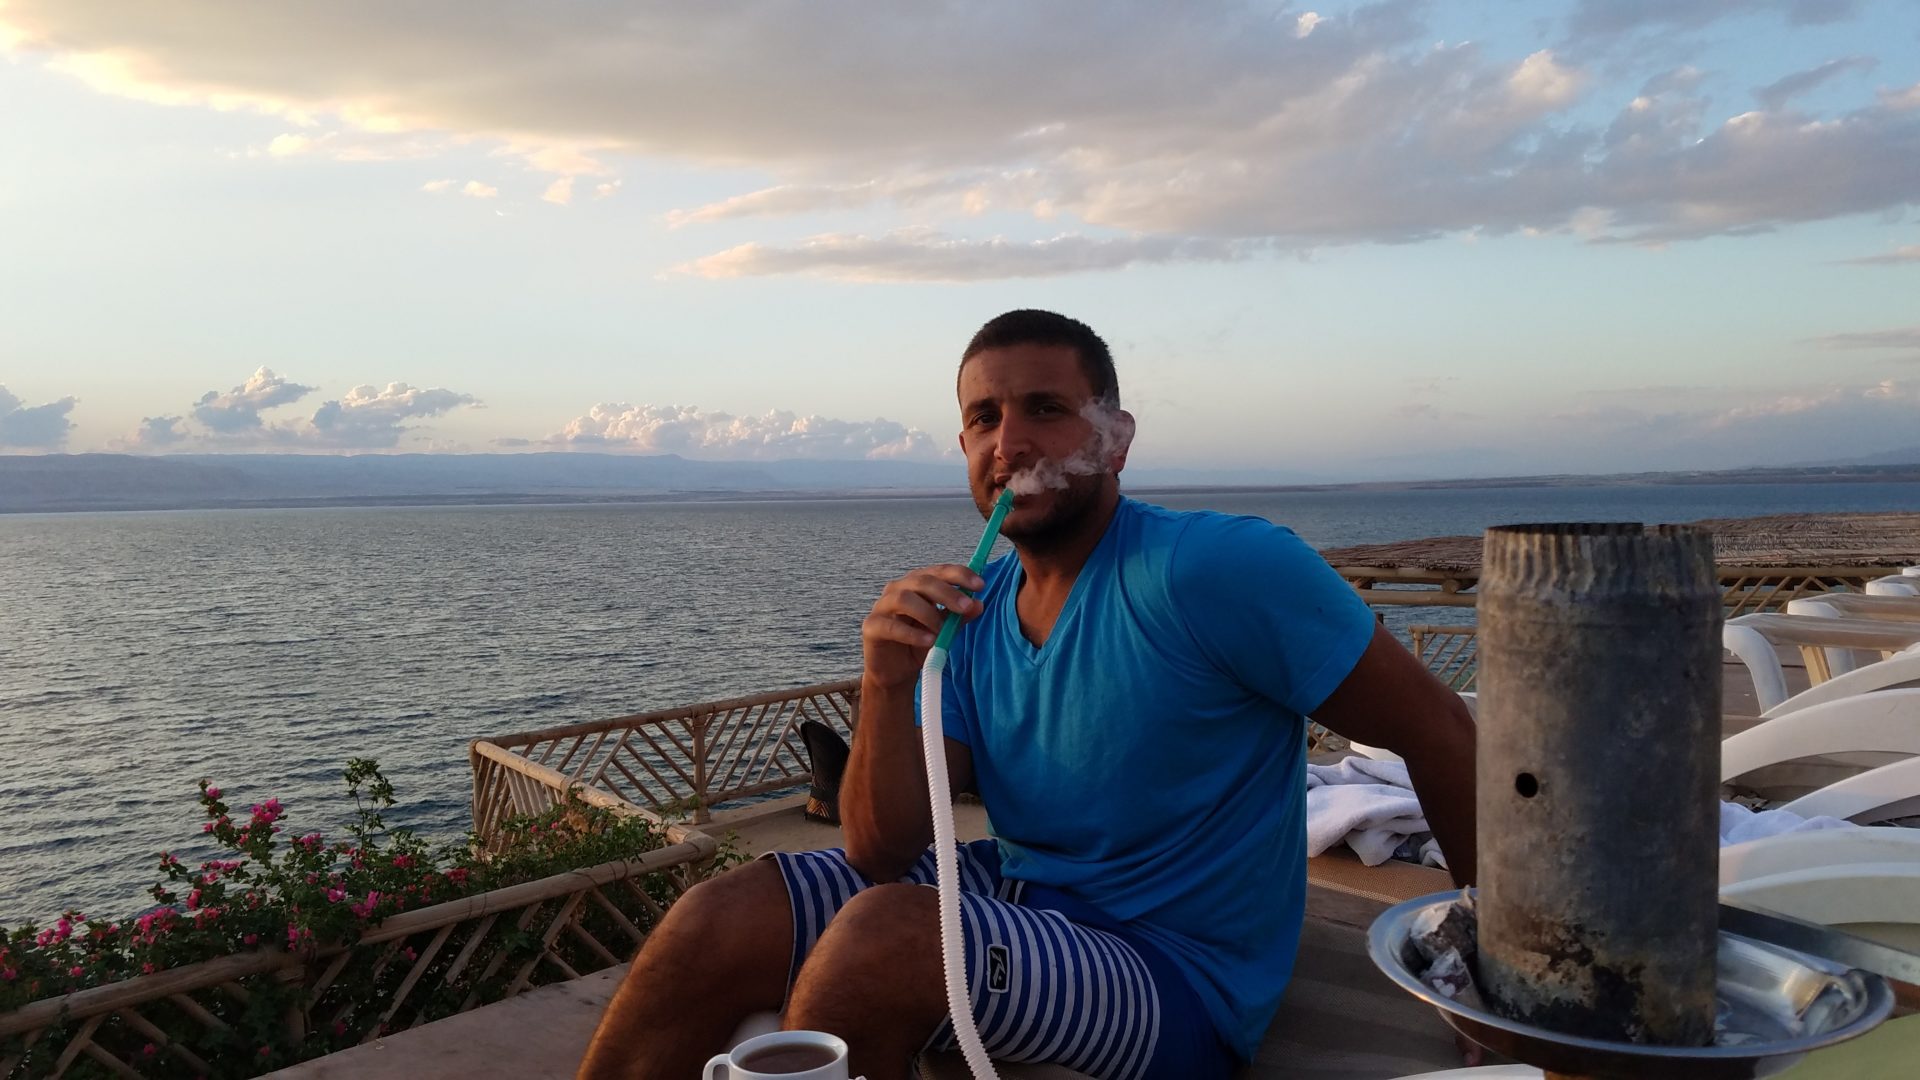 a man smoking a hookah on a deck overlooking a body of water